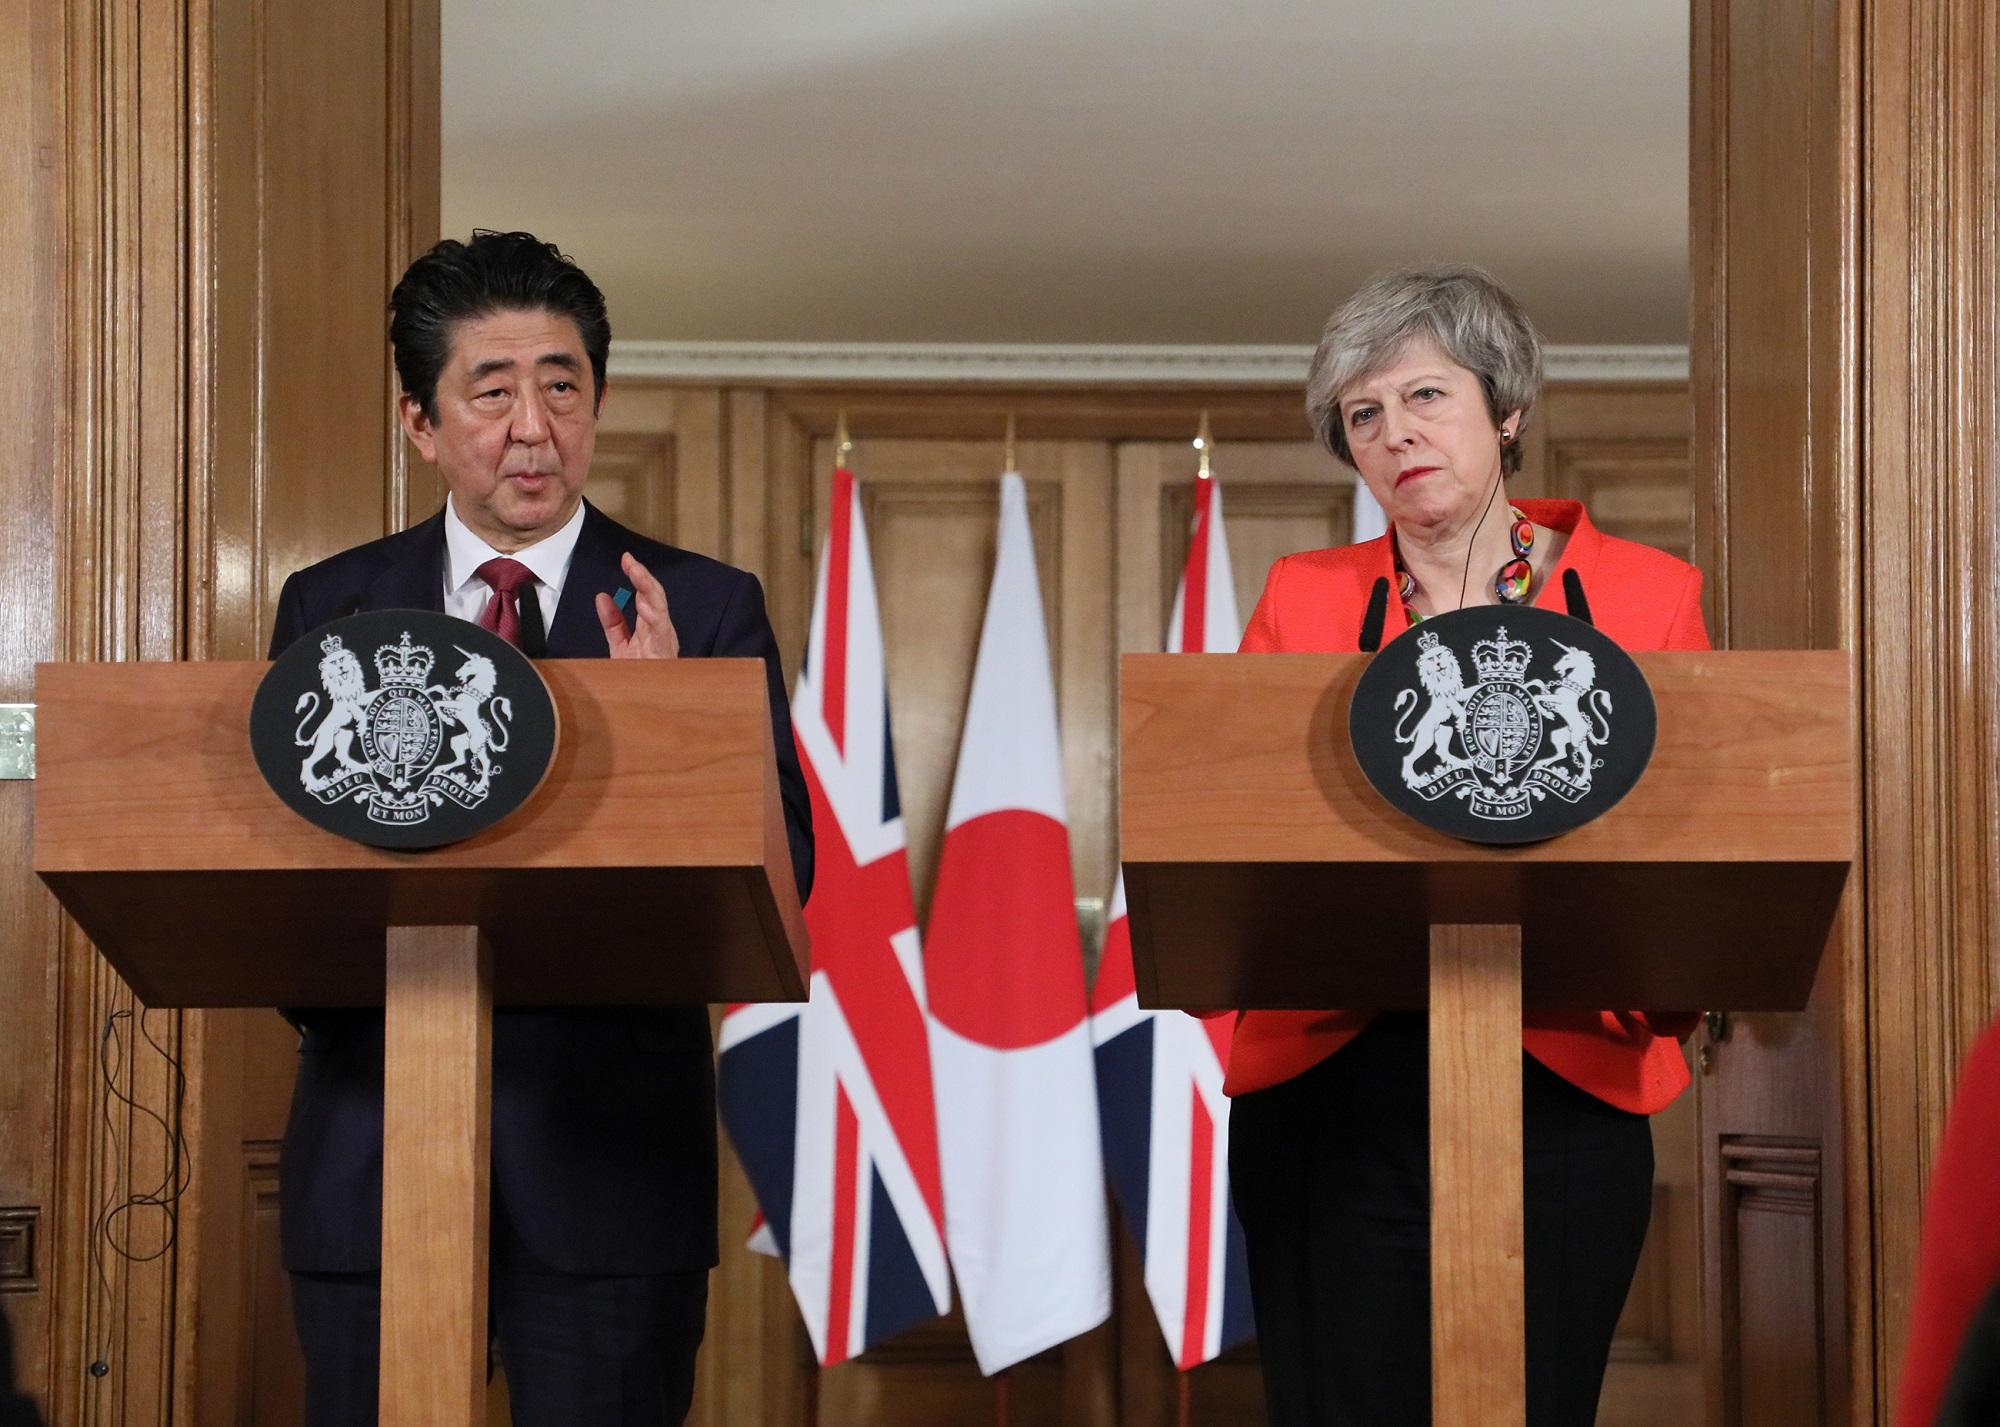 Photograph of the Japan-UK joint press conference